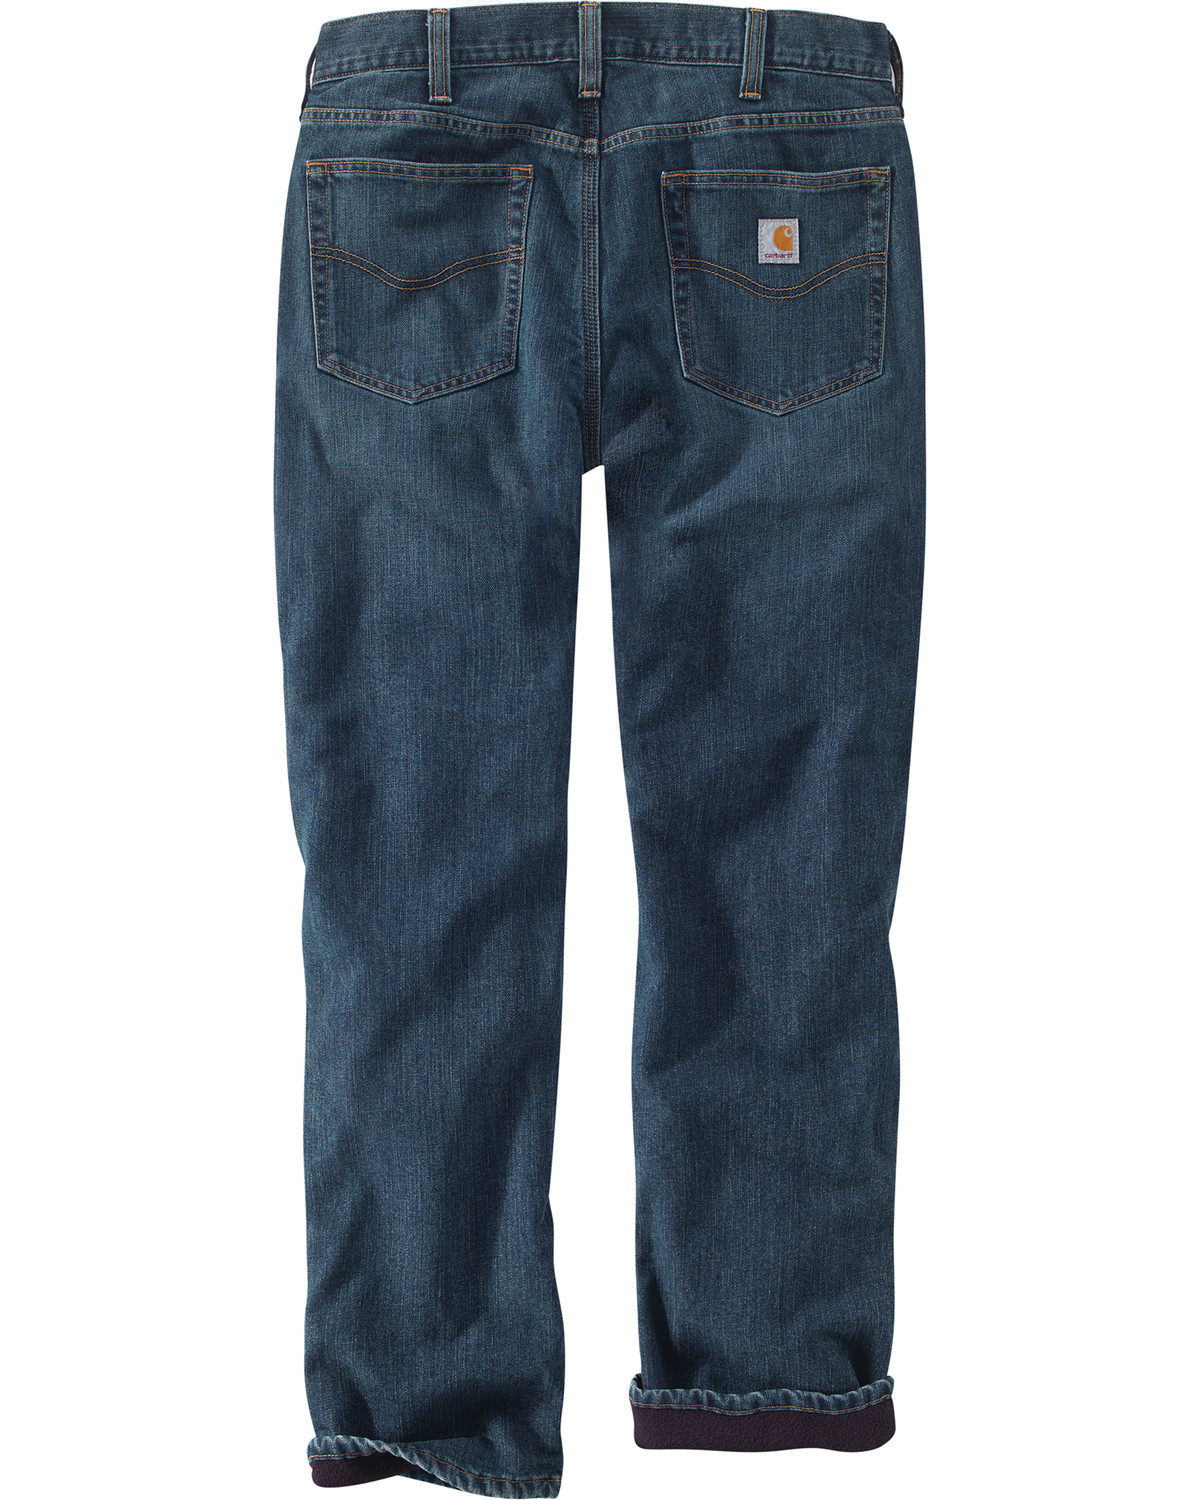 carhartt thermal lined pants